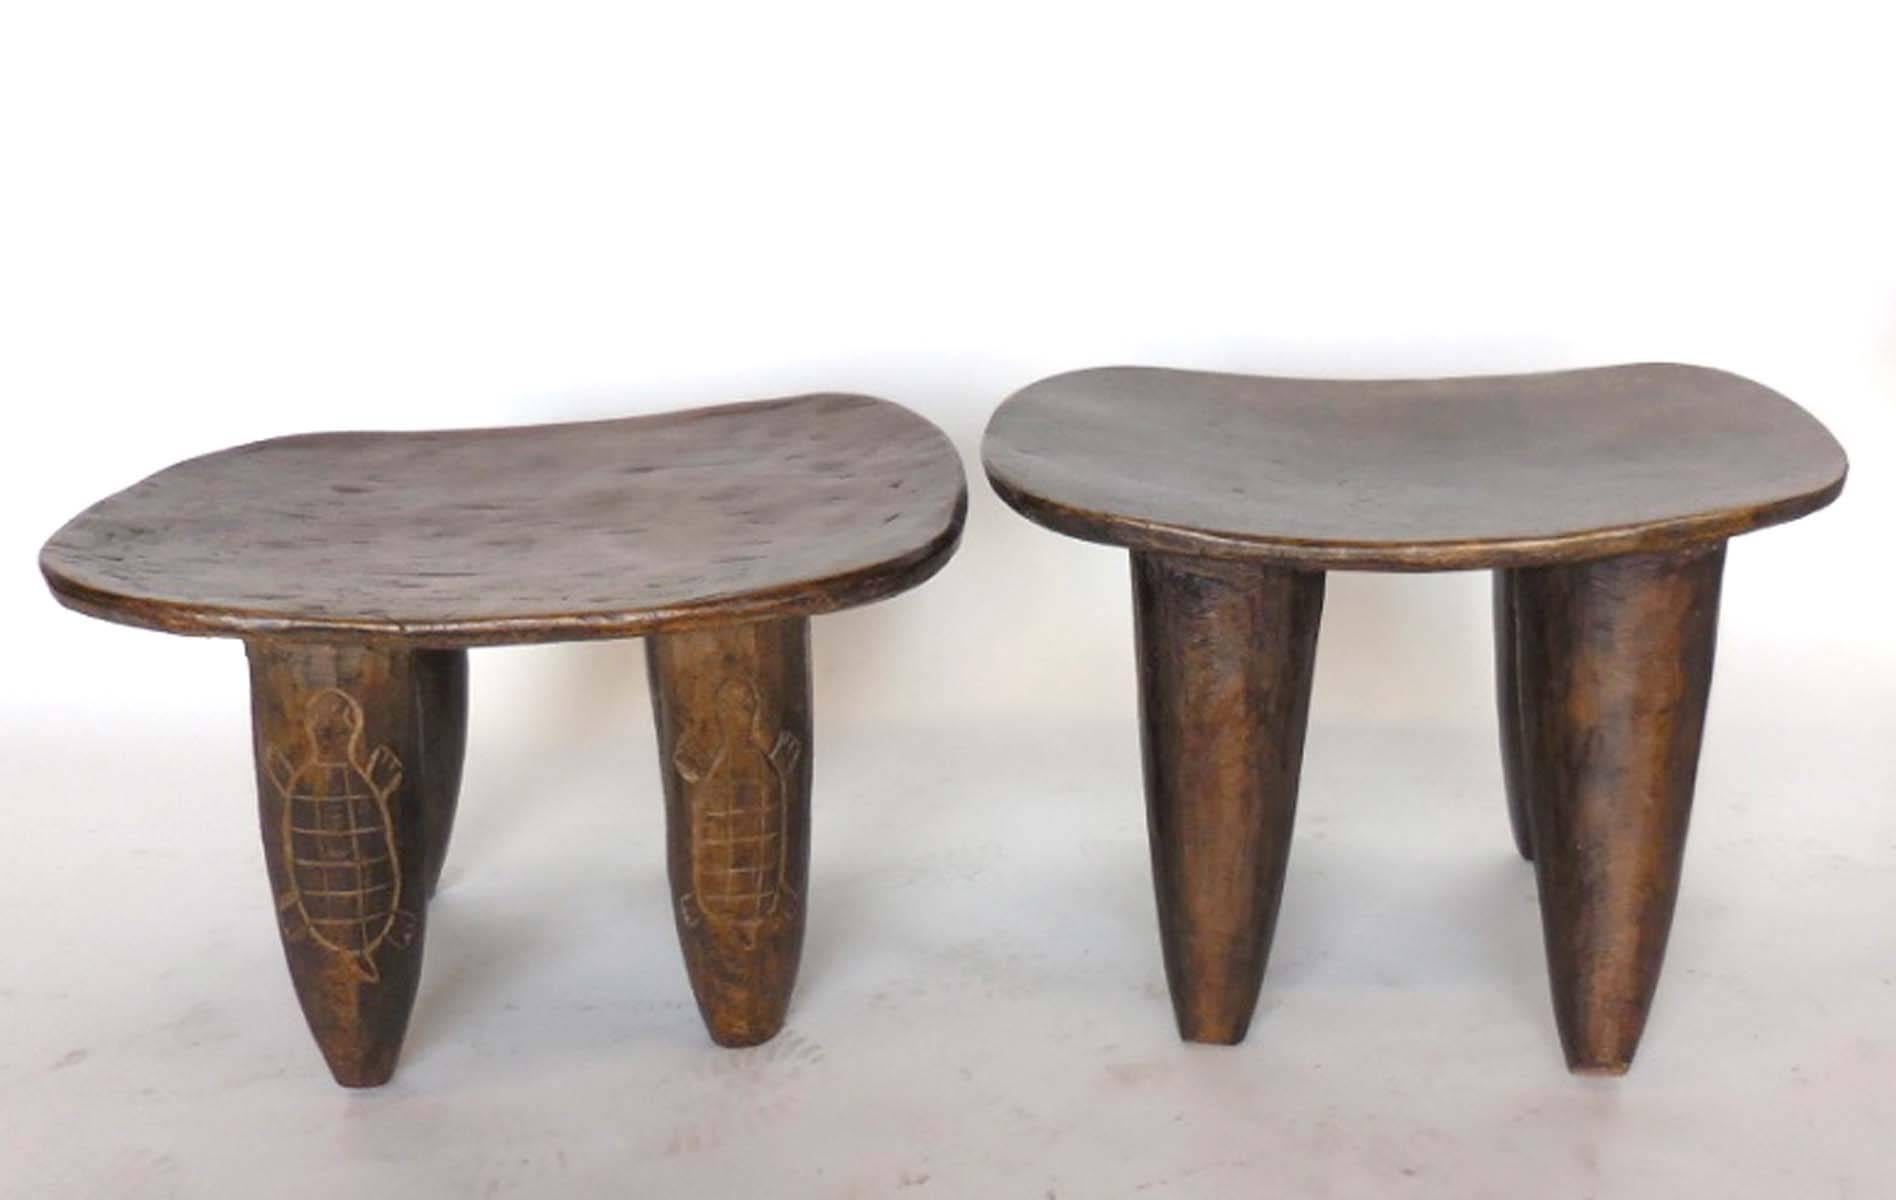 ONLY LEFT ONE AVAILABLE. Hand-carved stool or small side table from the Senufo tribe of Mali. Each stool is hand-carved out of one piece of wood, early 20th century. 
Left measures 22.5 x 18.75 x 14.75
